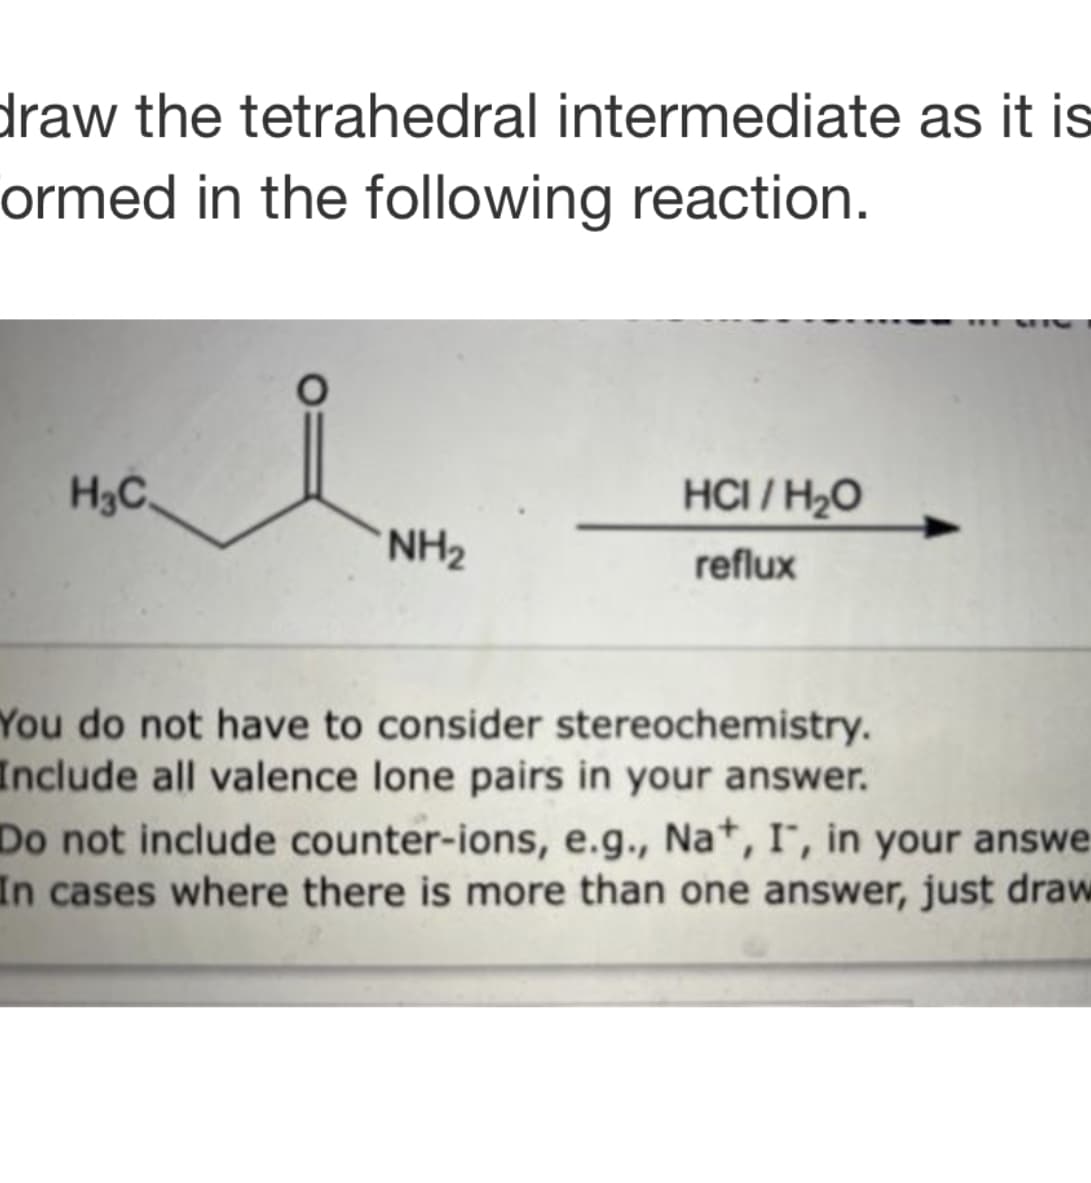 draw the tetrahedral intermediate as it is
ormed in the following reaction.
H₂C
O
NH₂
HCI/H₂O
reflux
You do not have to consider stereochemistry.
Include all valence lone pairs in your answer.
Do not include counter-ions, e.g., Na+, I, in your answe
In cases where there is more than one answer, just draw